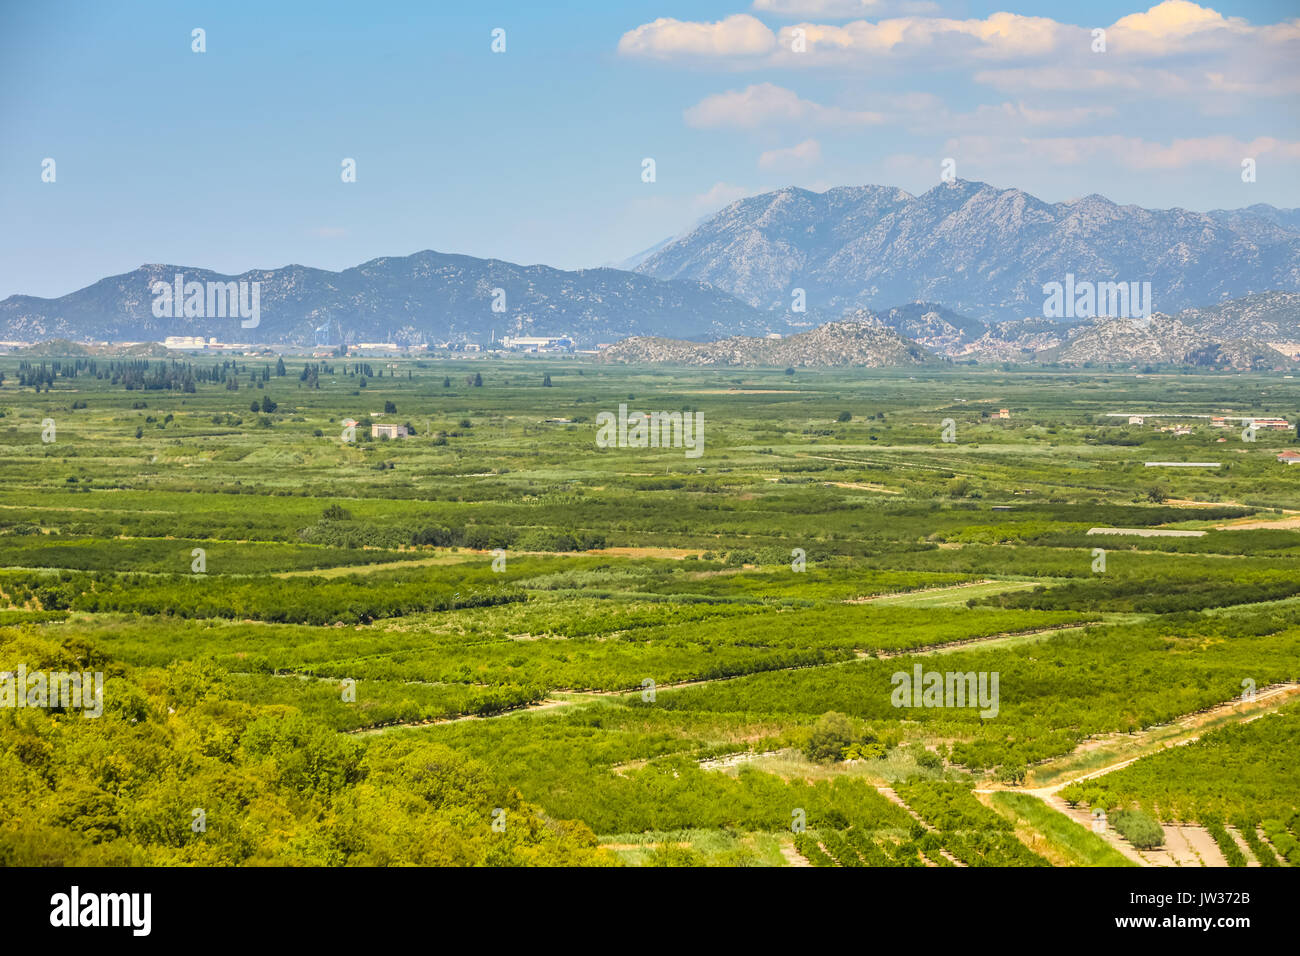 A view of the agricultural orchards and fields in the delta of the river Neretva in Opuzen, Croatia. Stock Photo